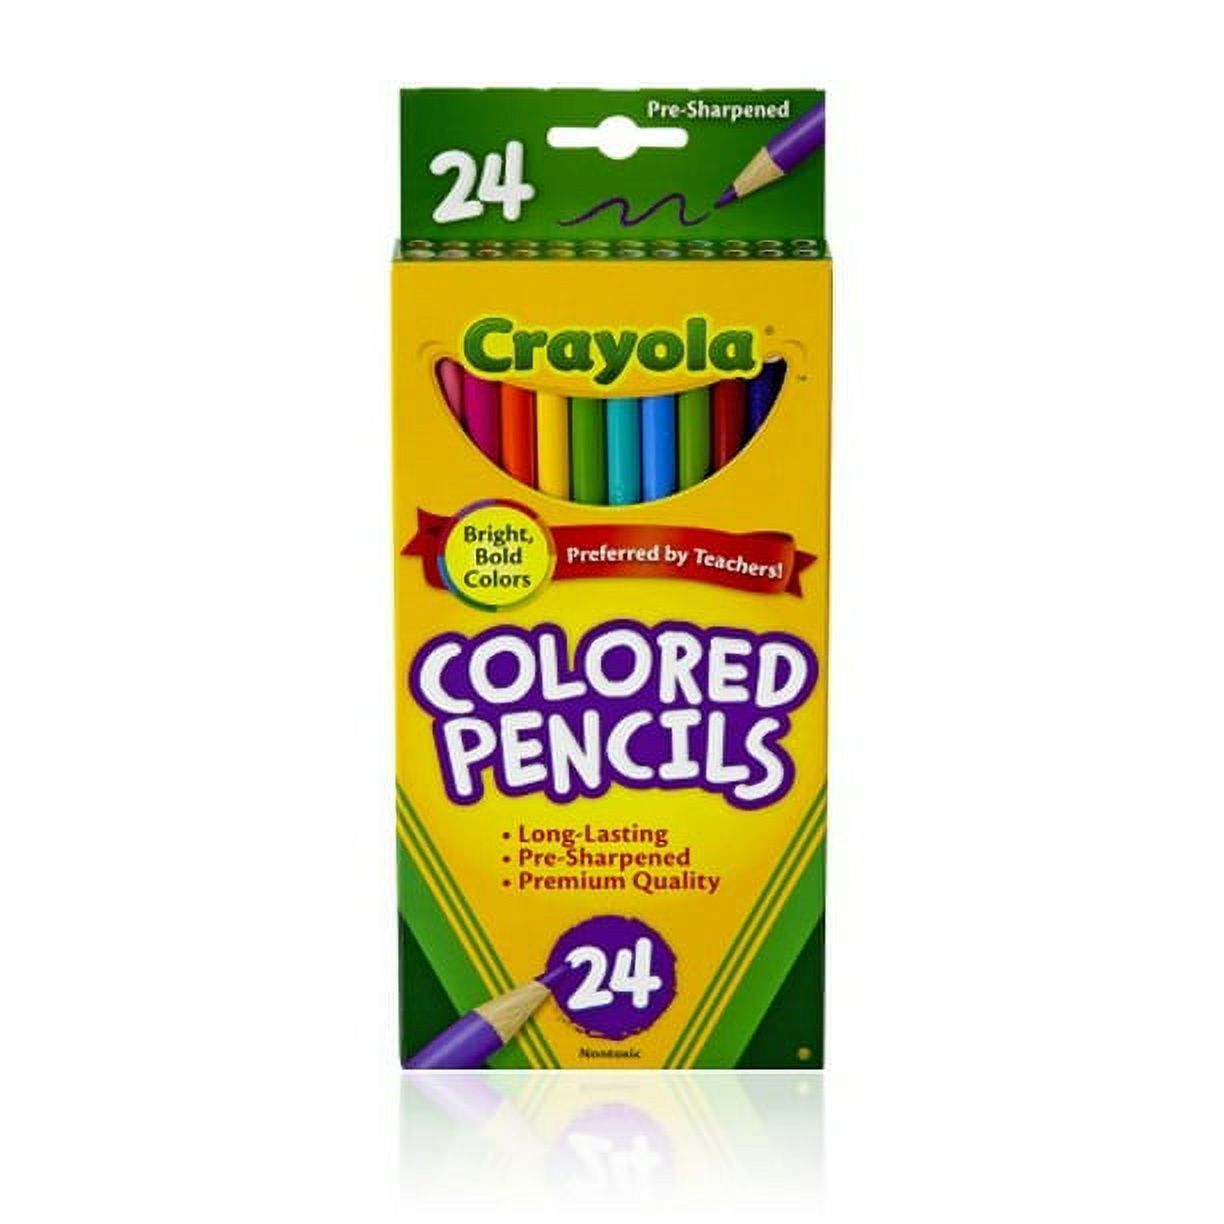 Crayola Full Size Non-Toxic Pre-Sharpened Colored Pencil Set (Pack of 3) - image 1 of 1